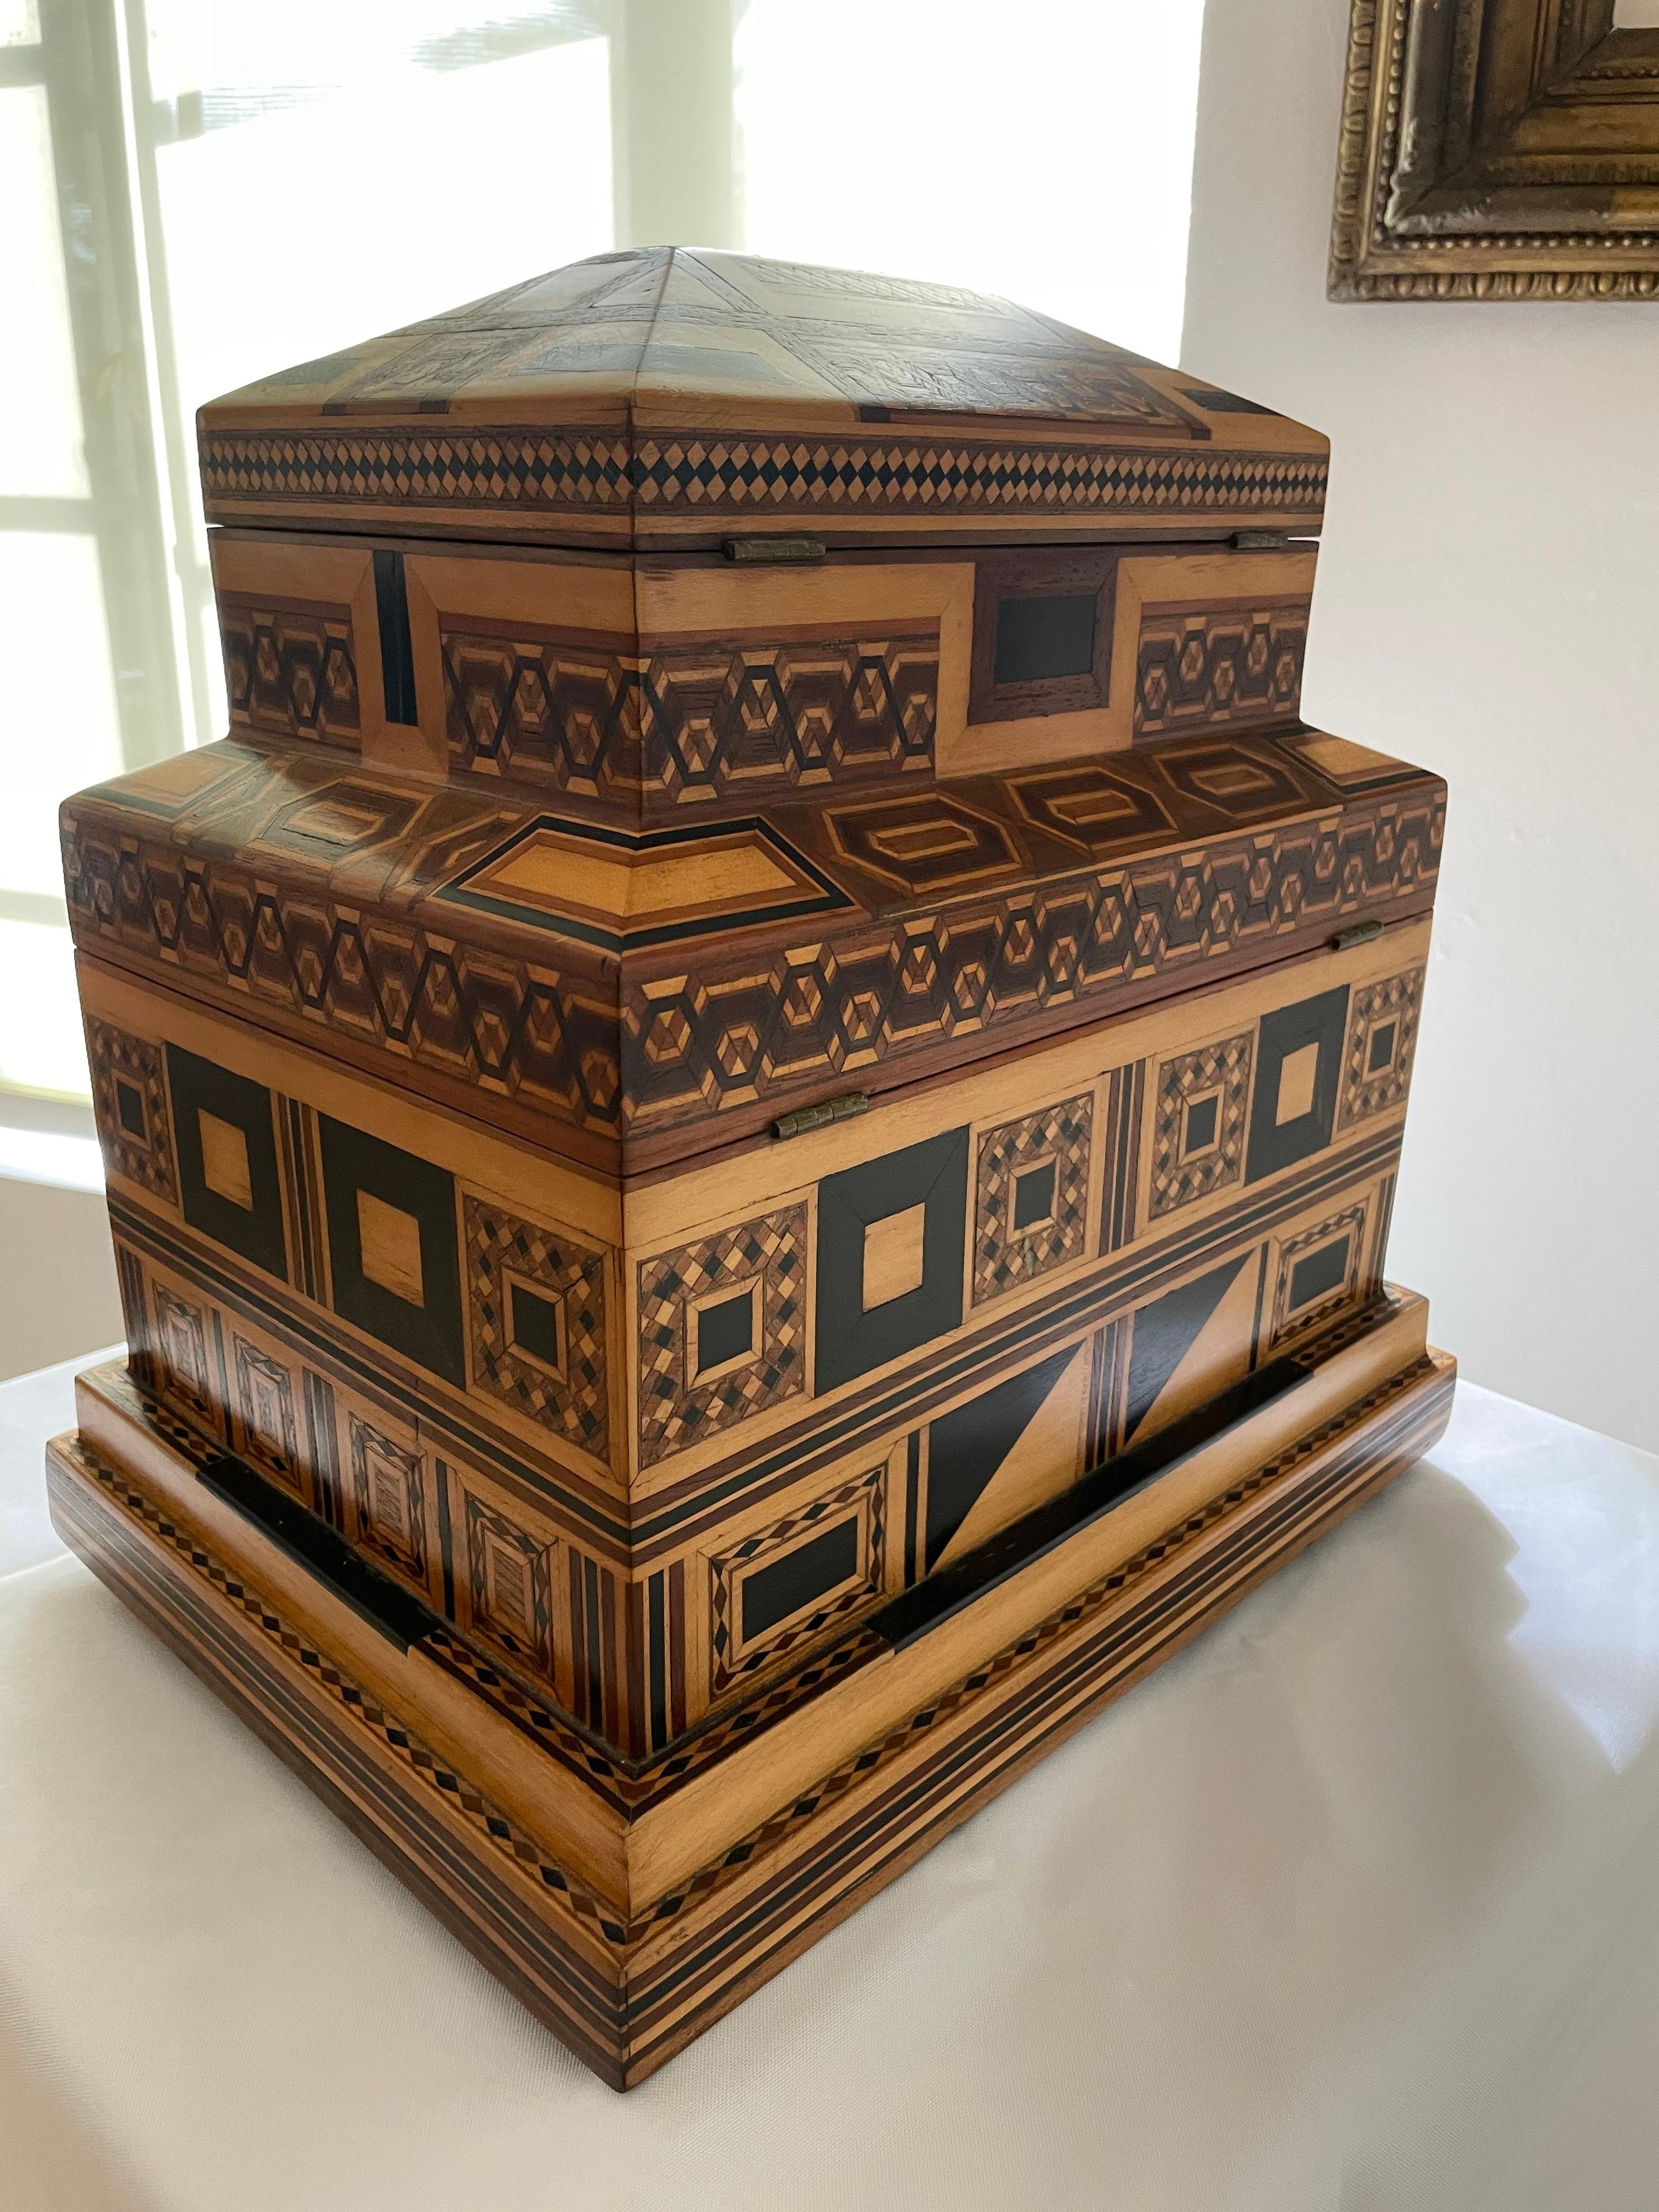 1900s Prisoner-Made Marquetry Inlay Wood Box in Masonic Temple Design 11